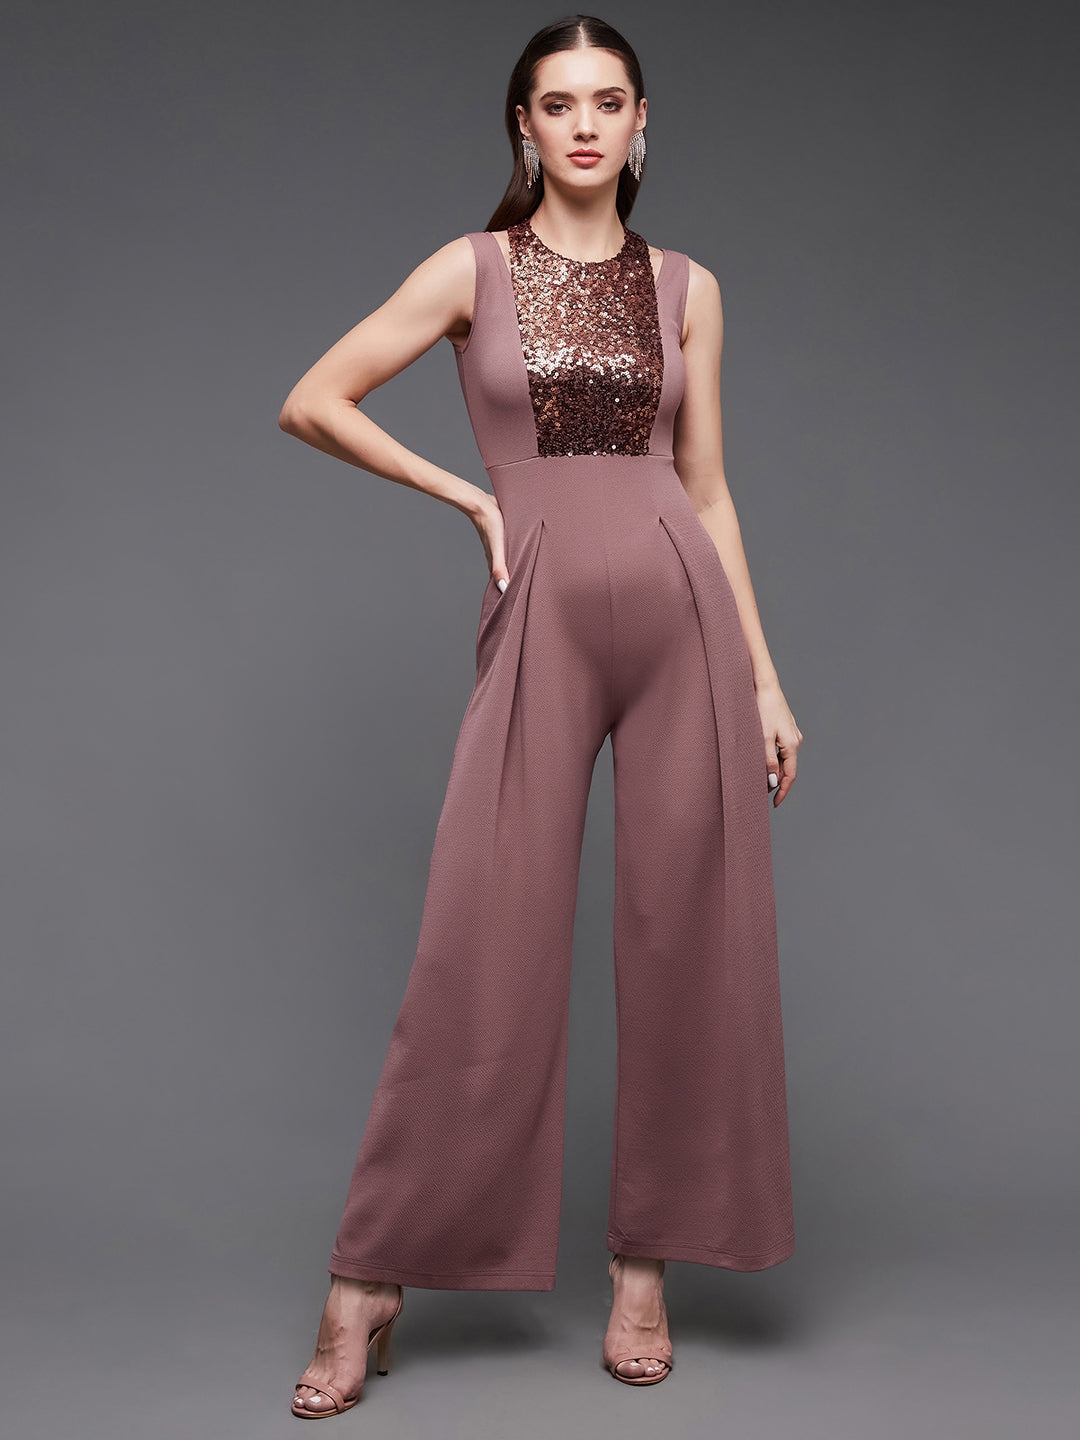 MISS CHASE | Mauve Color Halter Neck Sleeveless Solid Pleated/Wide Leg Sequin Paneled Regular Length Jumpsuit